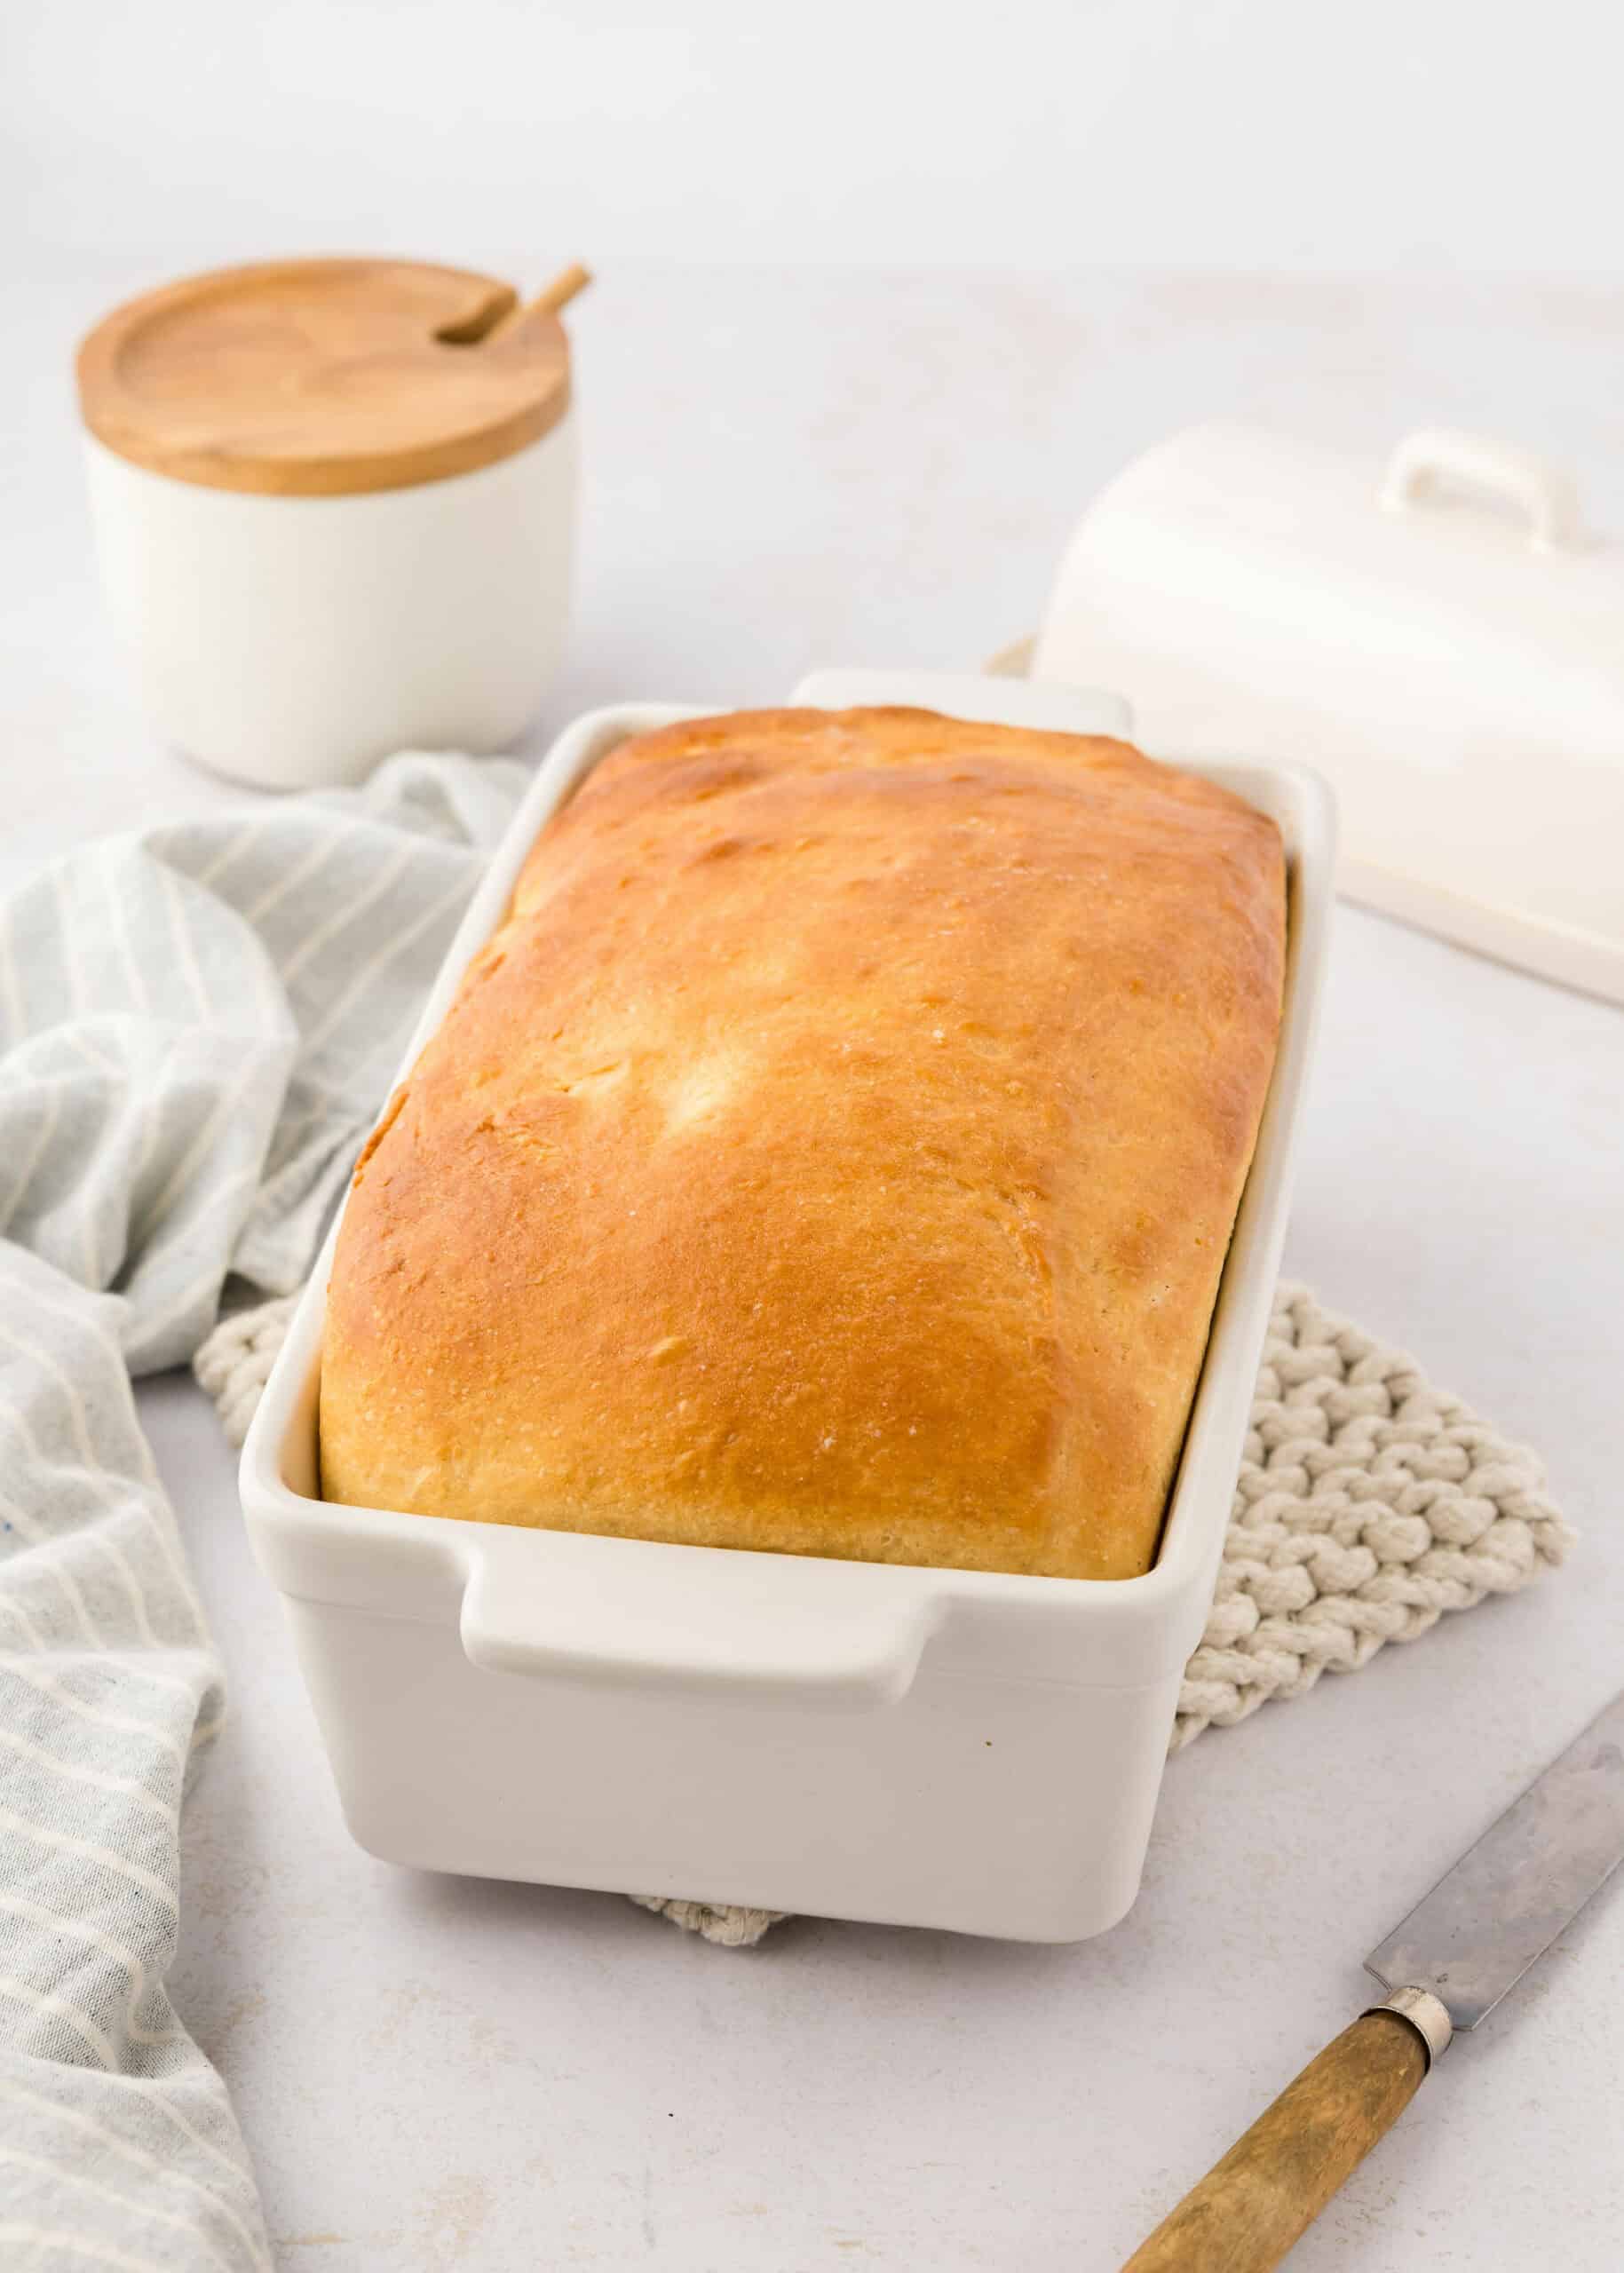 homemade sandwich bread in a white ceramic loaf pan.